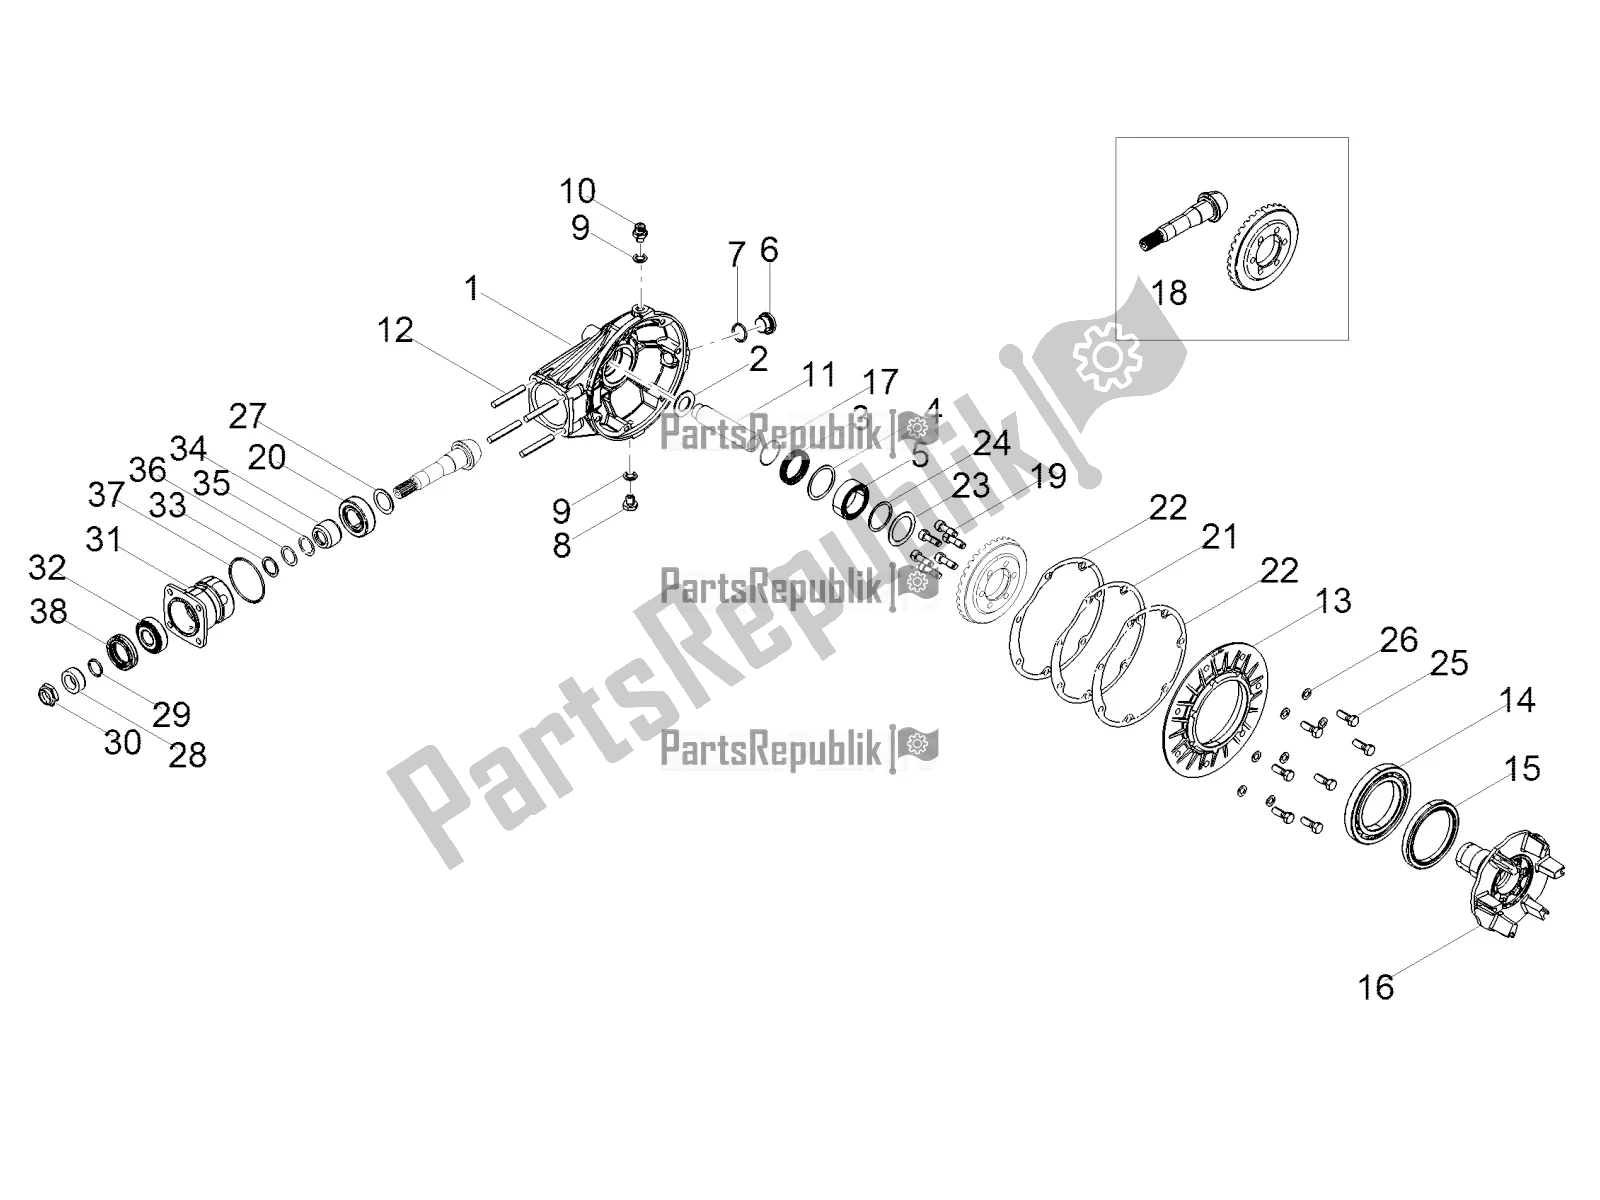 All parts for the Rear Transmission / Components of the Moto-Guzzi V7 III Milano 750 ABS 2019